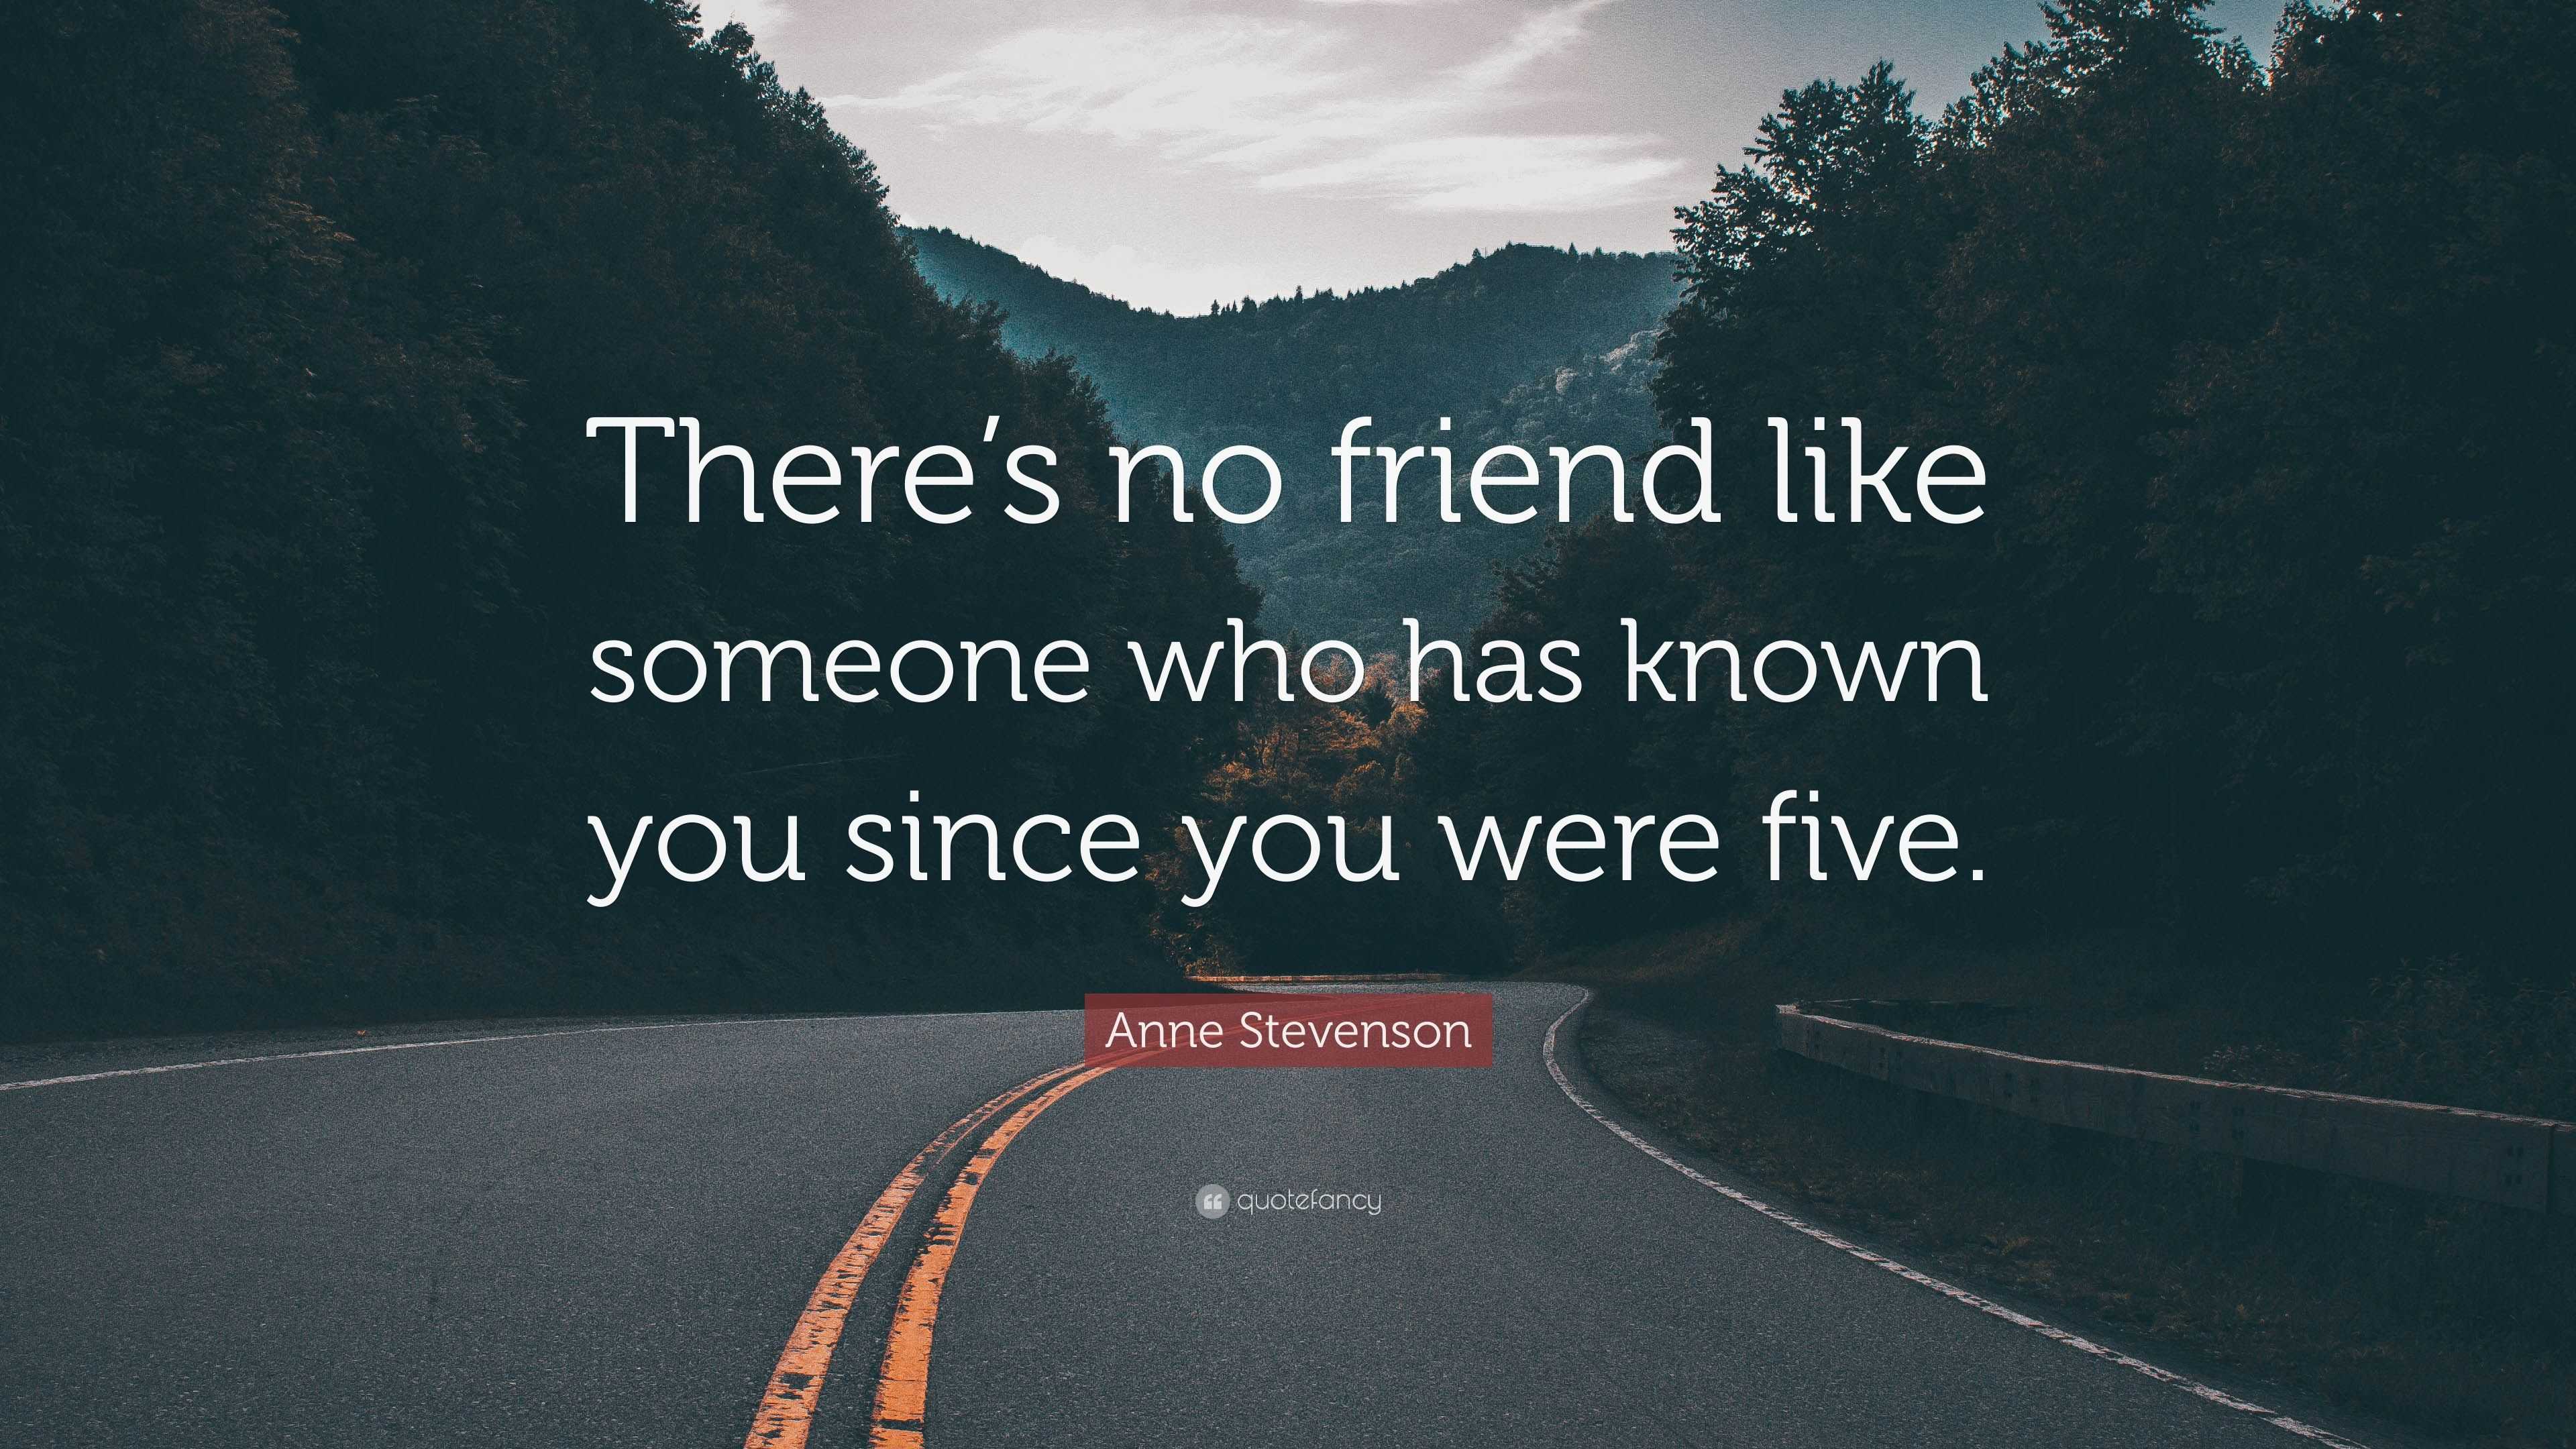 Anne Stevenson Quote: “There’s no friend like someone who has known you ...